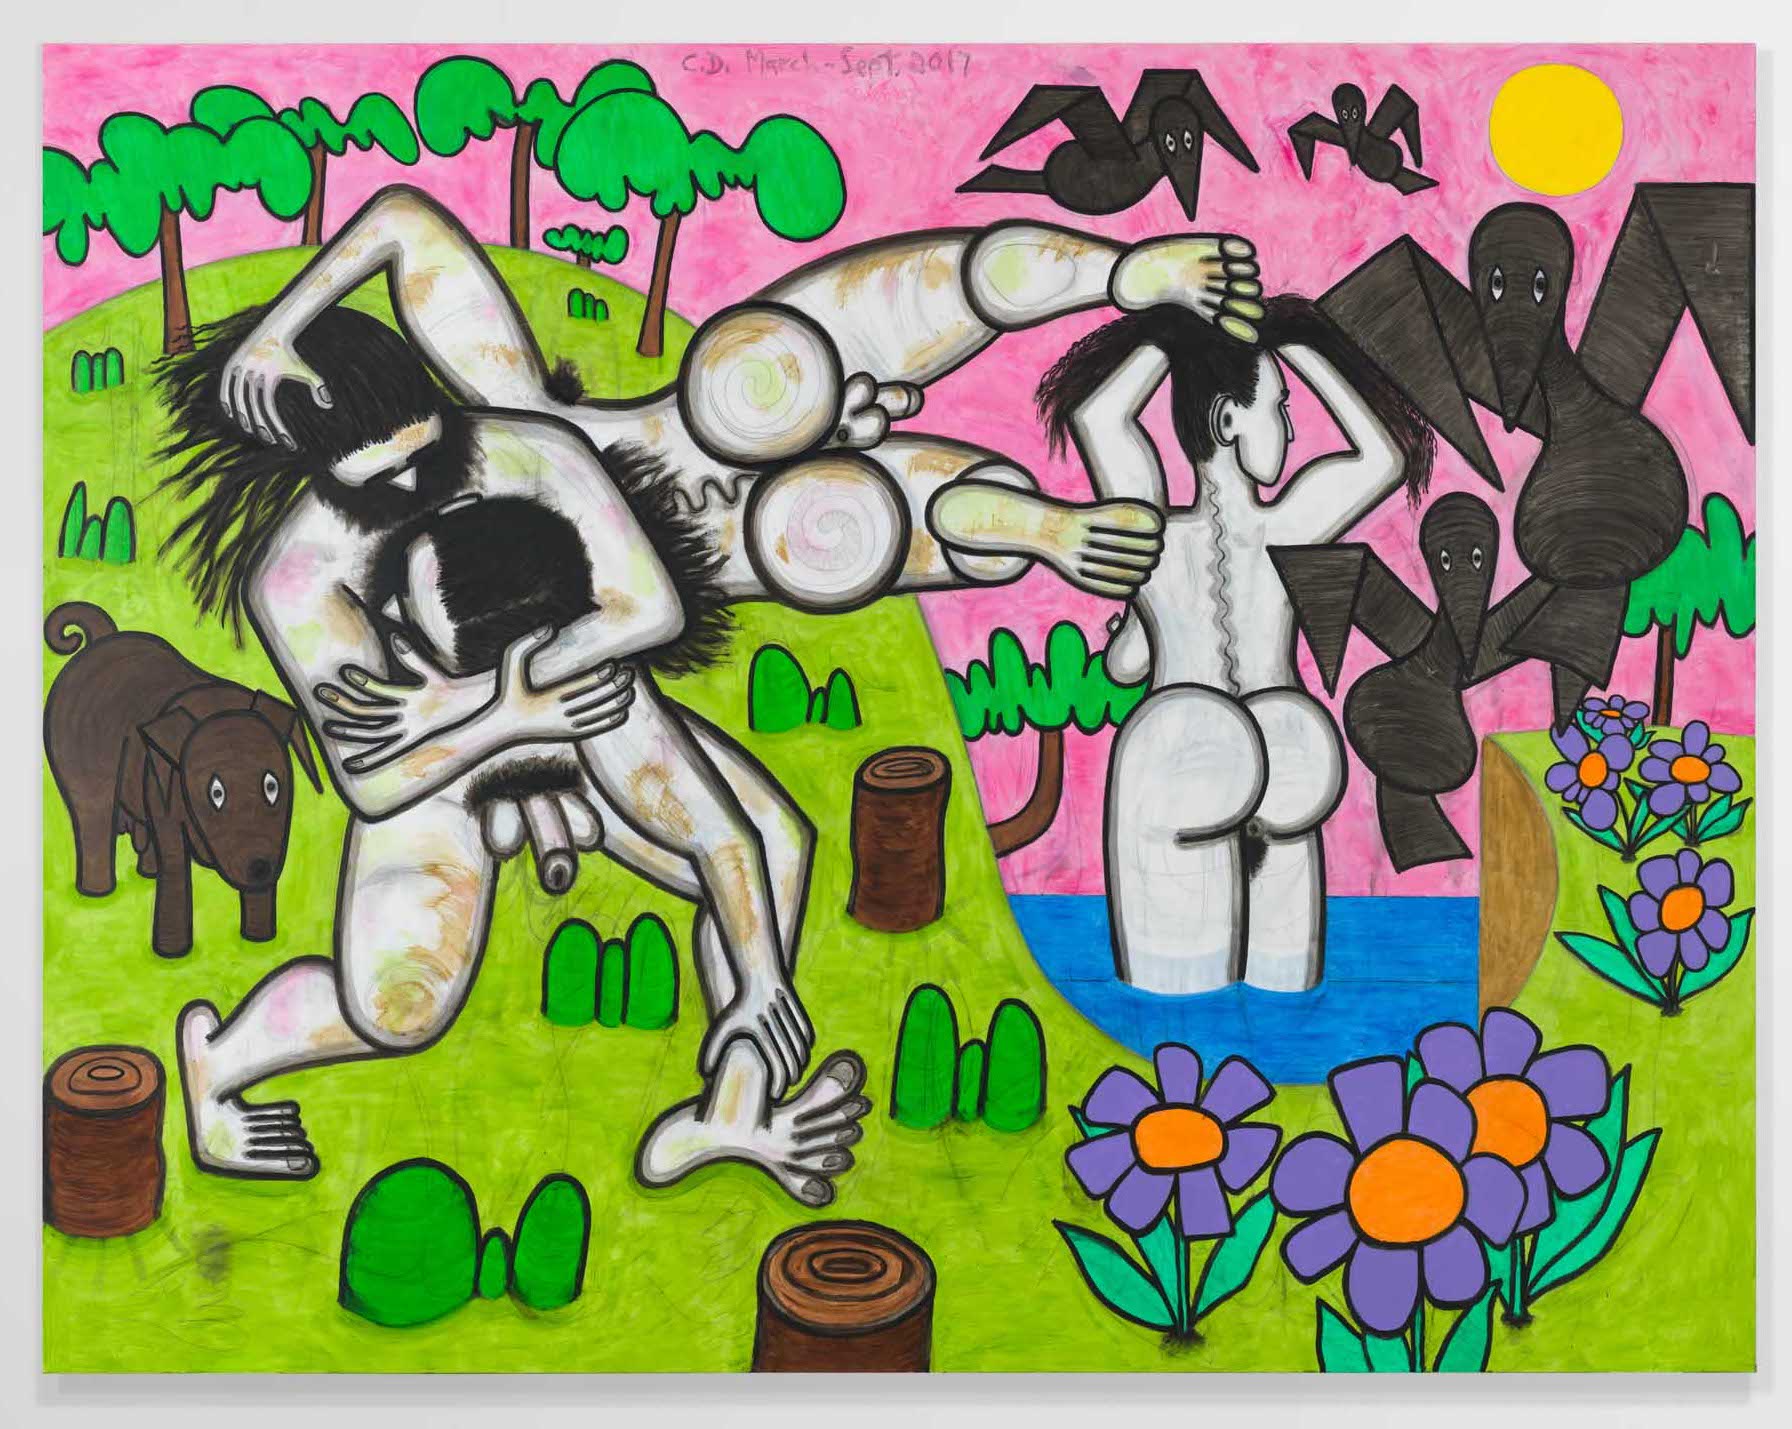 Carroll Dunham Any Day, 2017, Â© Carroll Dunham. Courtesy the artist and Gladstone Gallery, New York and Brussels